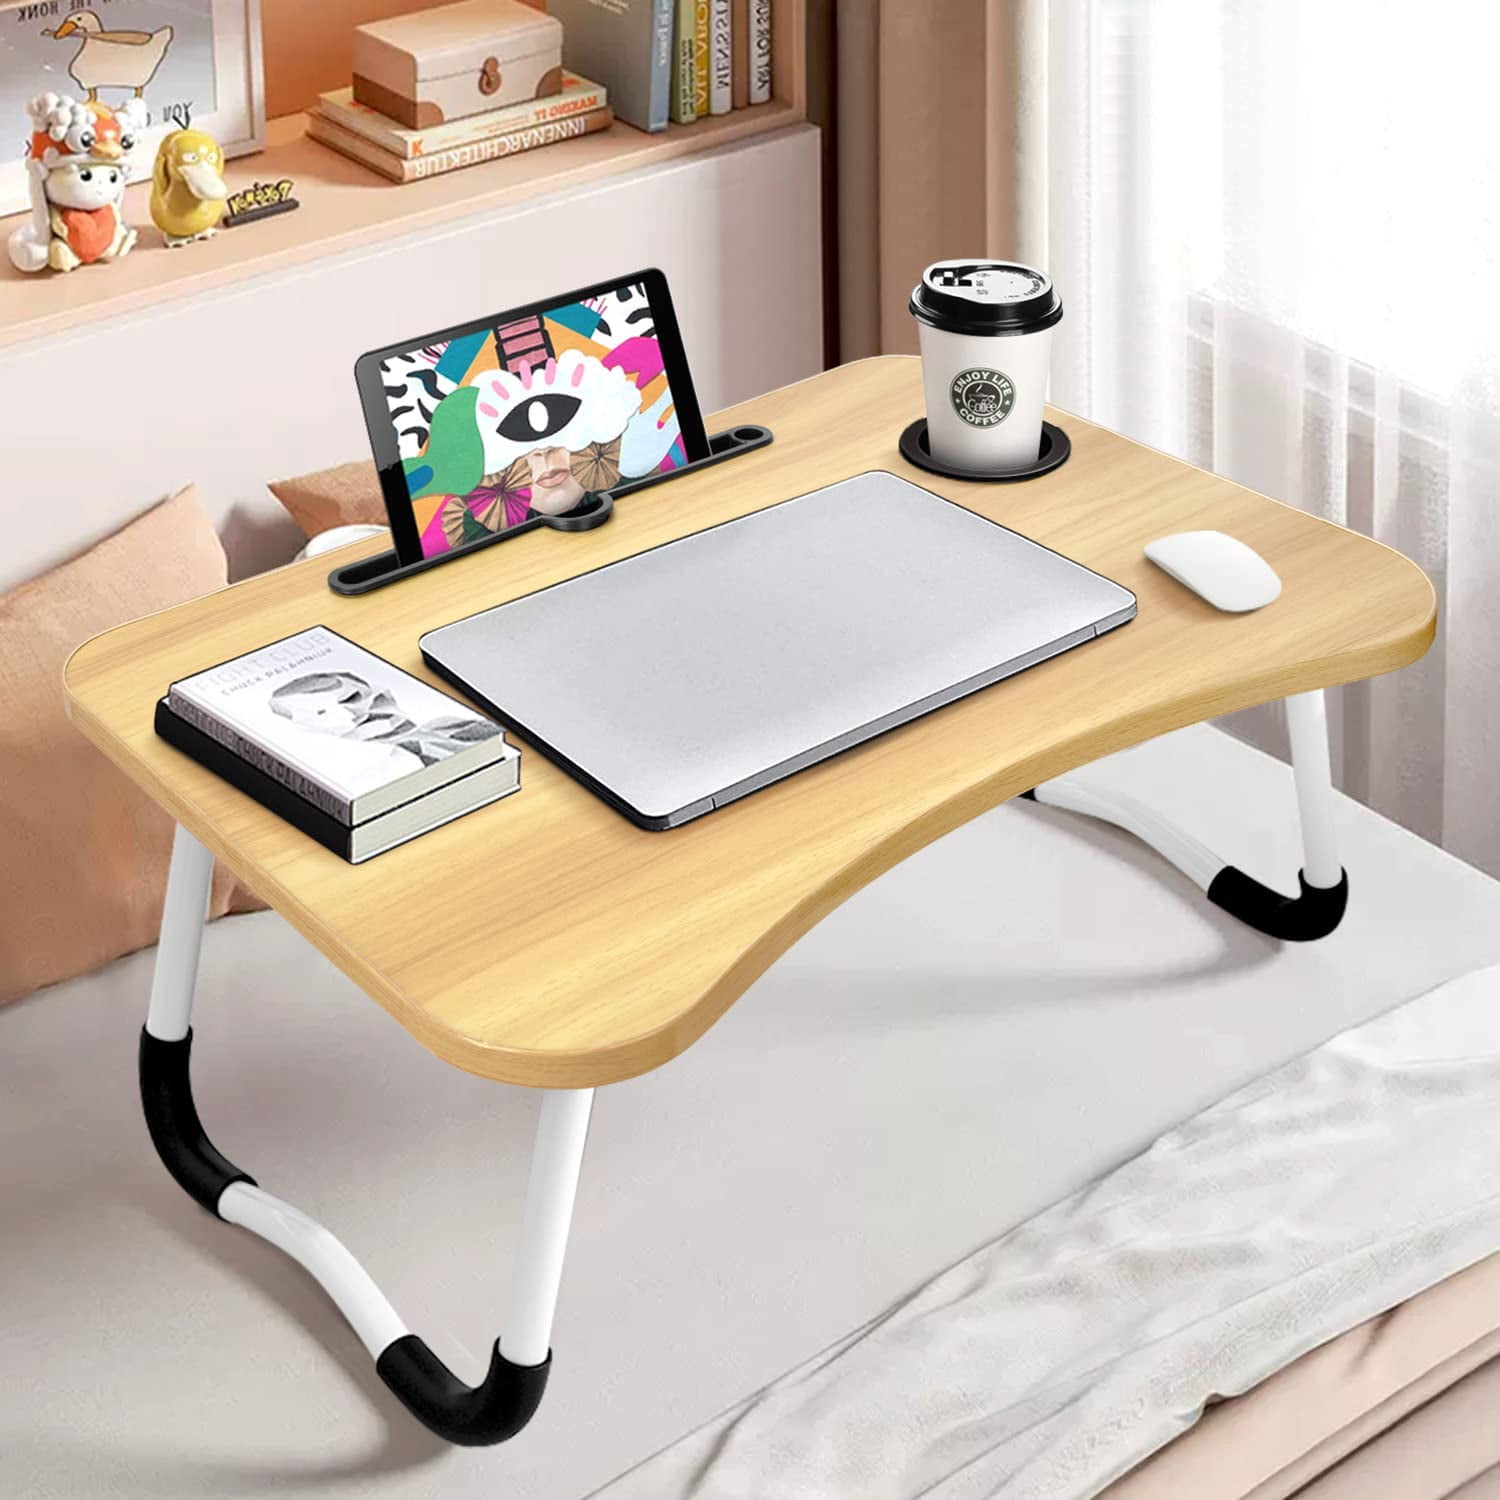 Laptop Lap Desk, Portable With Foam Cushion, LED Desk Light, and Cup Holder  By Northwest (Blue)